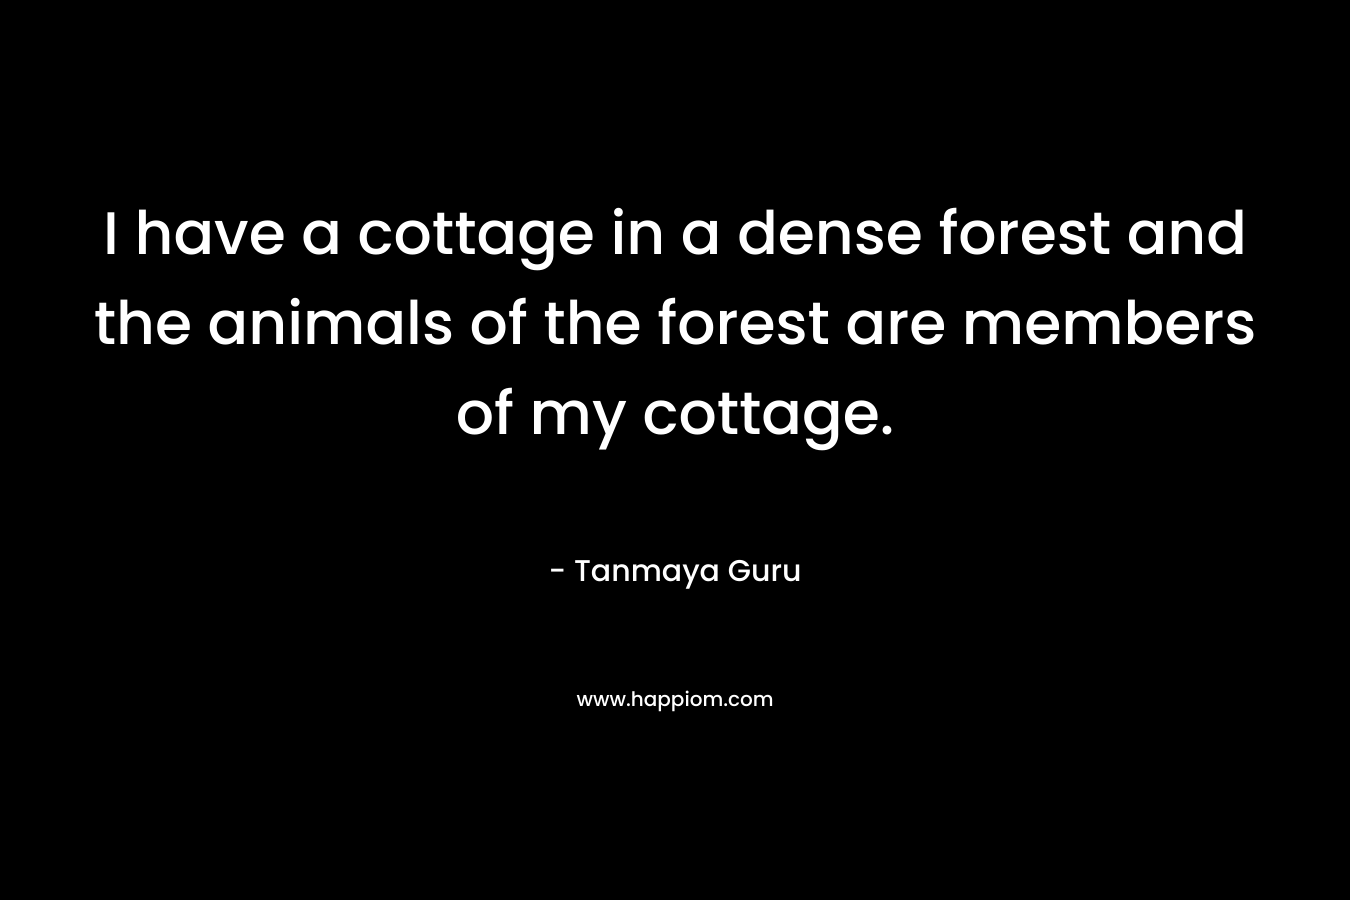 I have a cottage in a dense forest and the animals of the forest are members of my cottage.